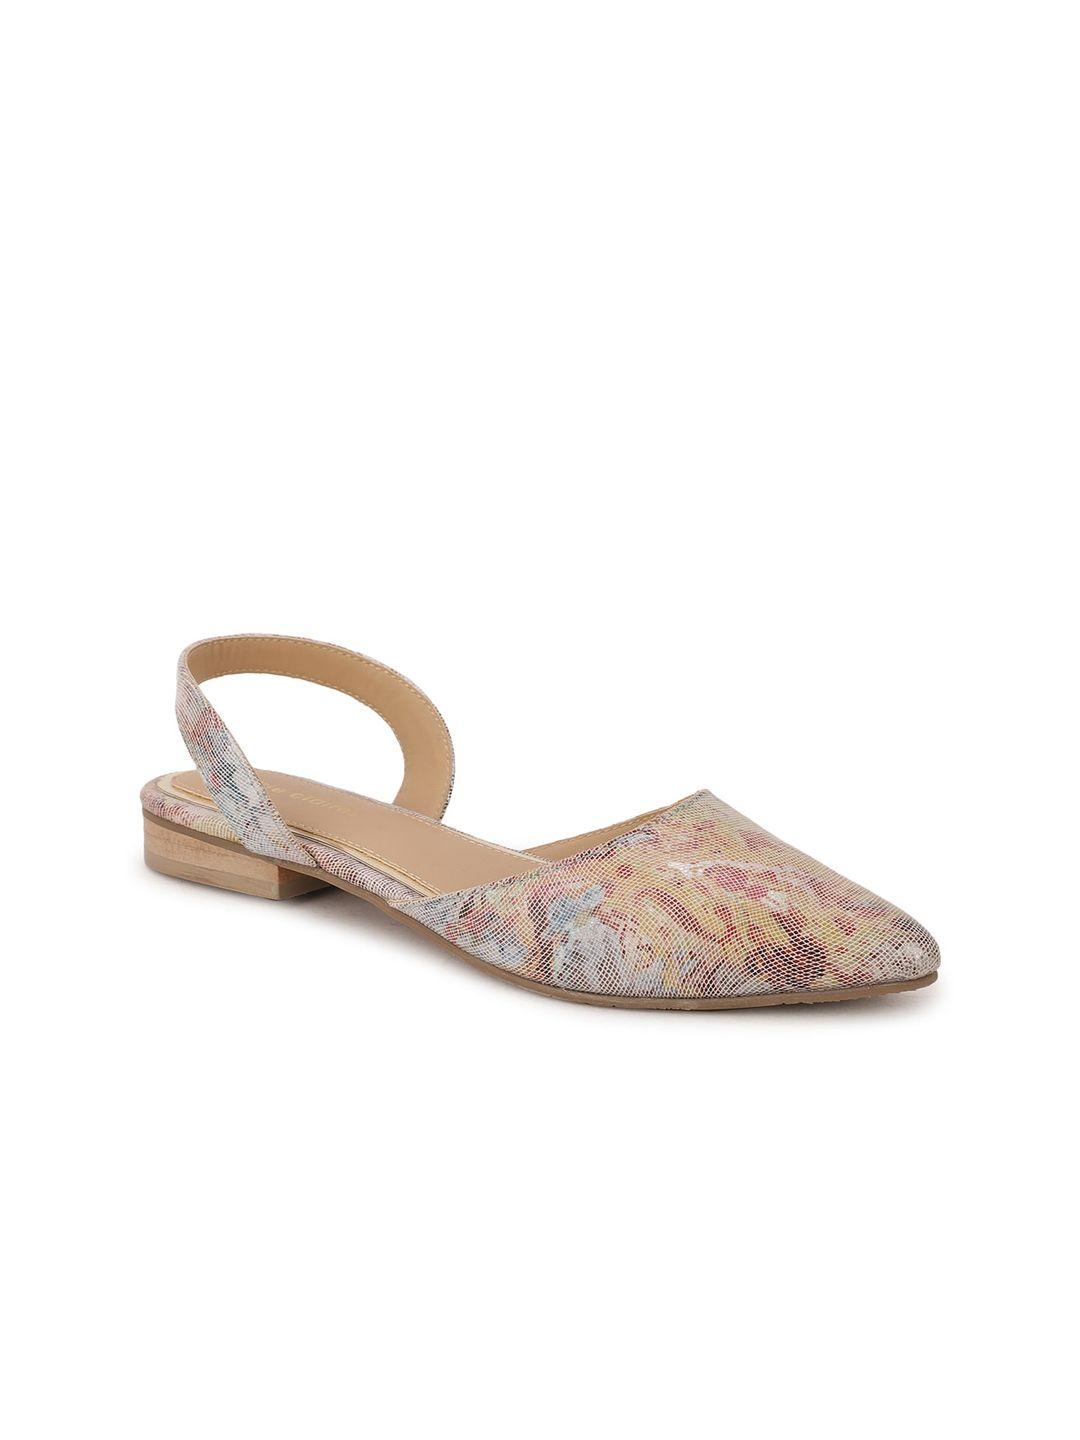 marie claire women beige printed mules